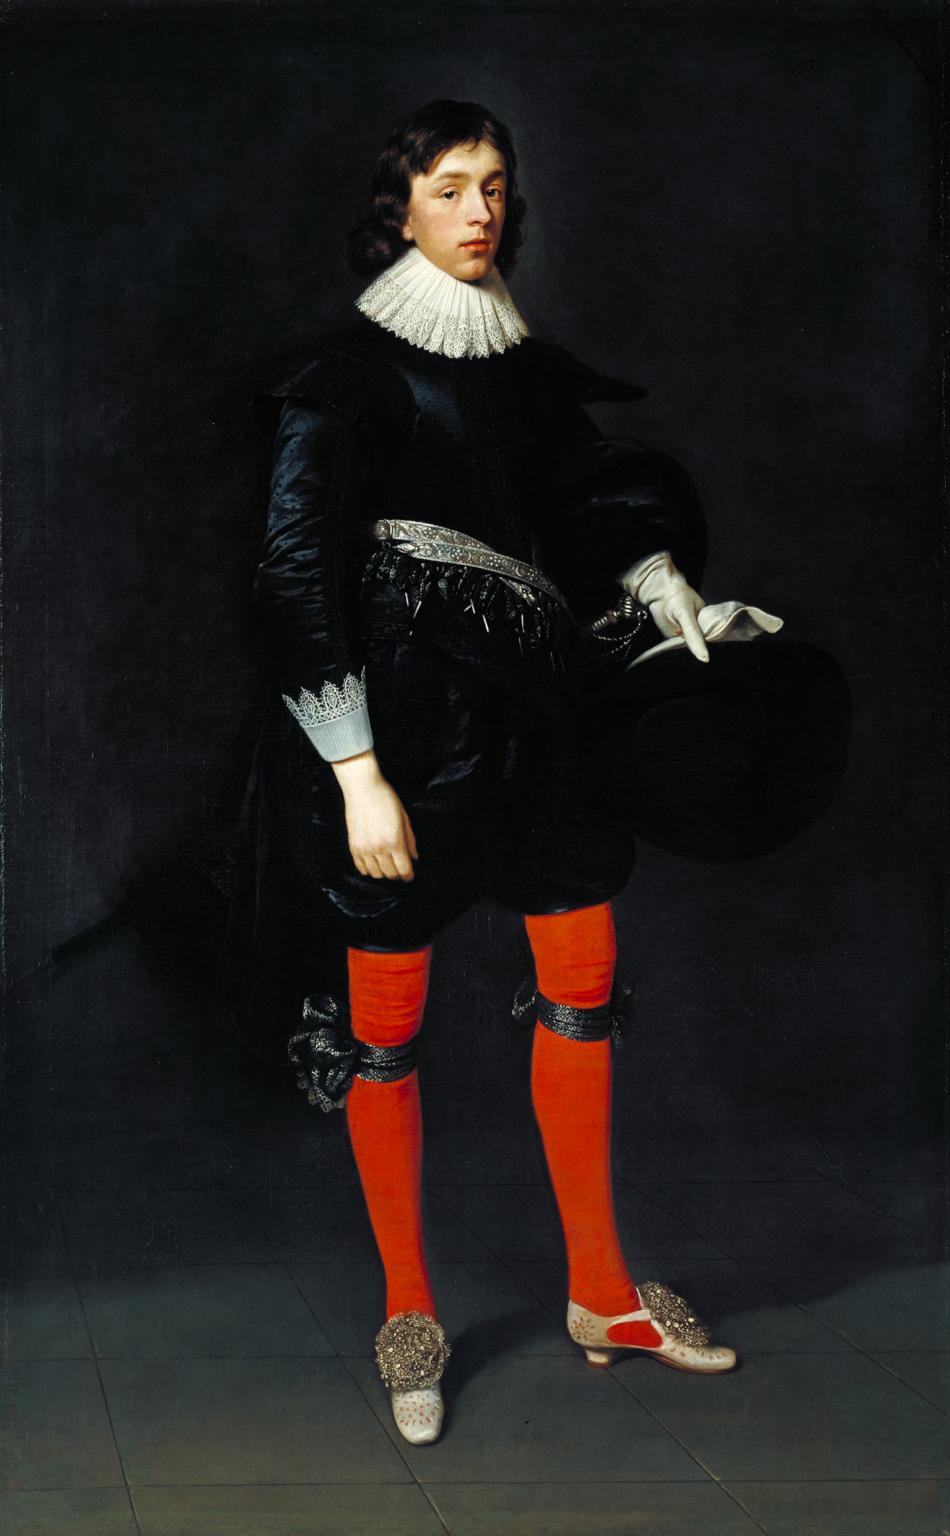 N03474: Portrait of James Hamilton, Earl of Arran, Later 3rd Marquis and 1st Duke of Hamilton, Aged 17